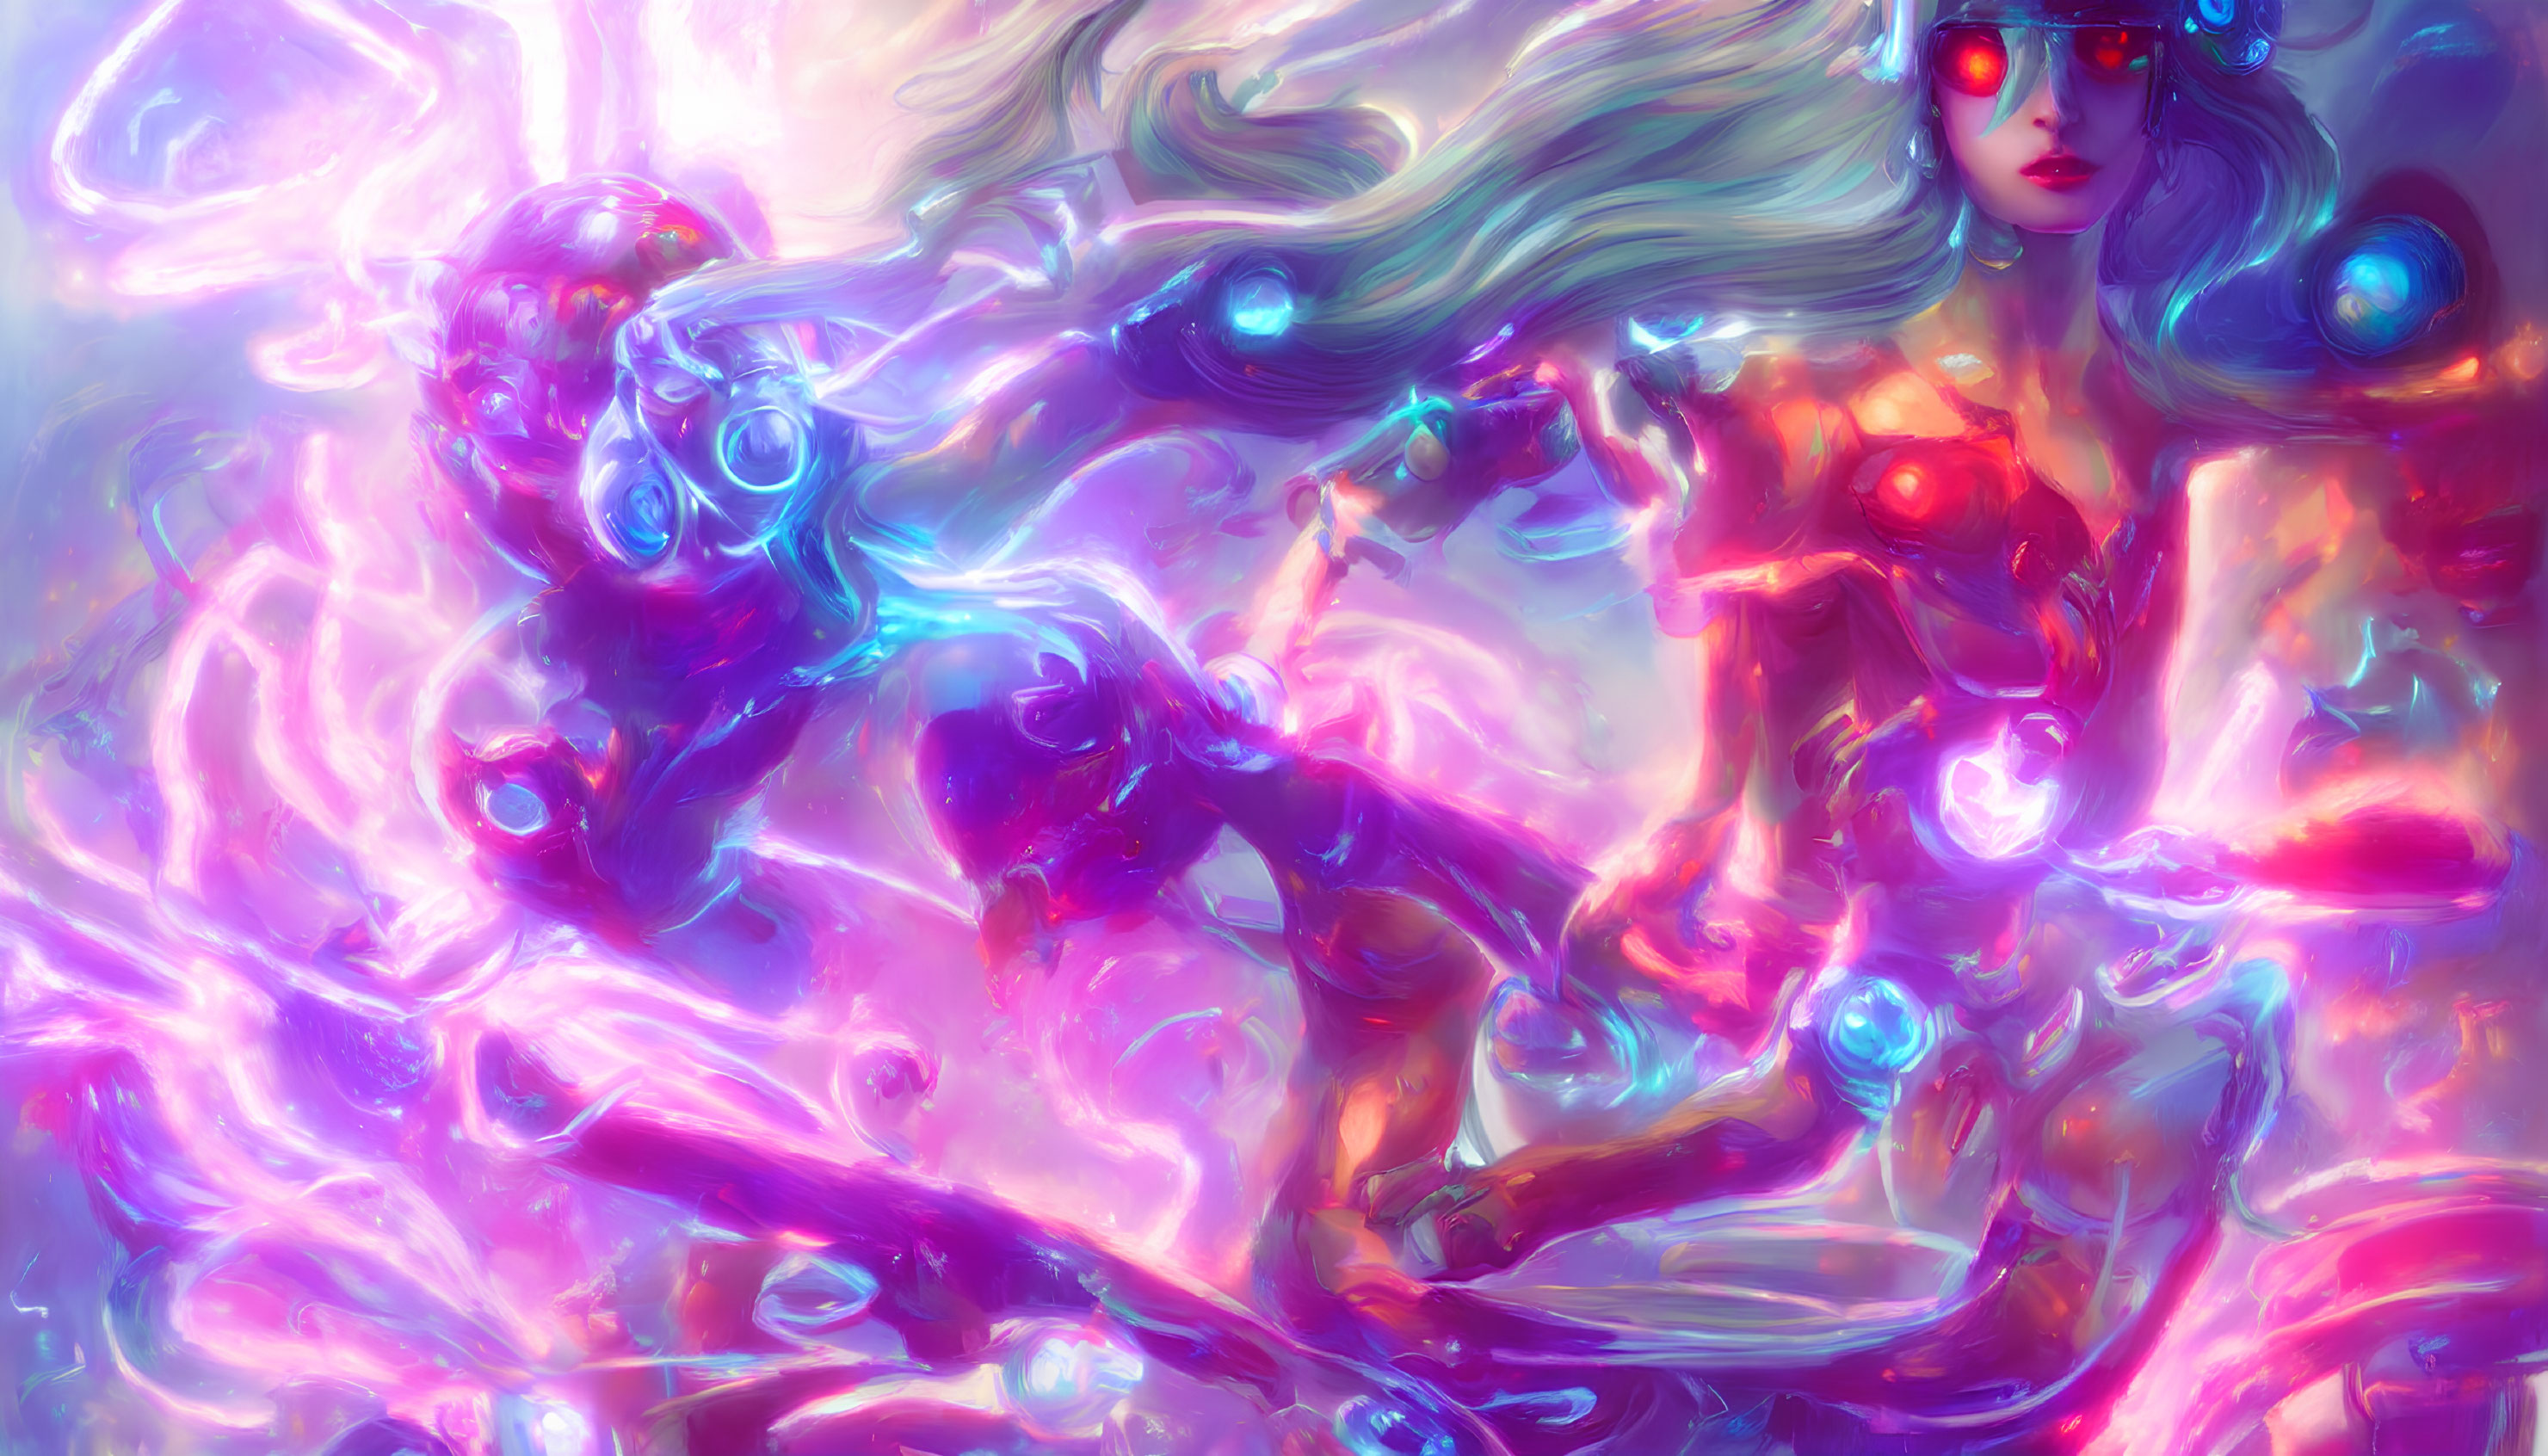 Colorful artwork of woman with flowing hair and futuristic goggles in pink and purple ambiance.